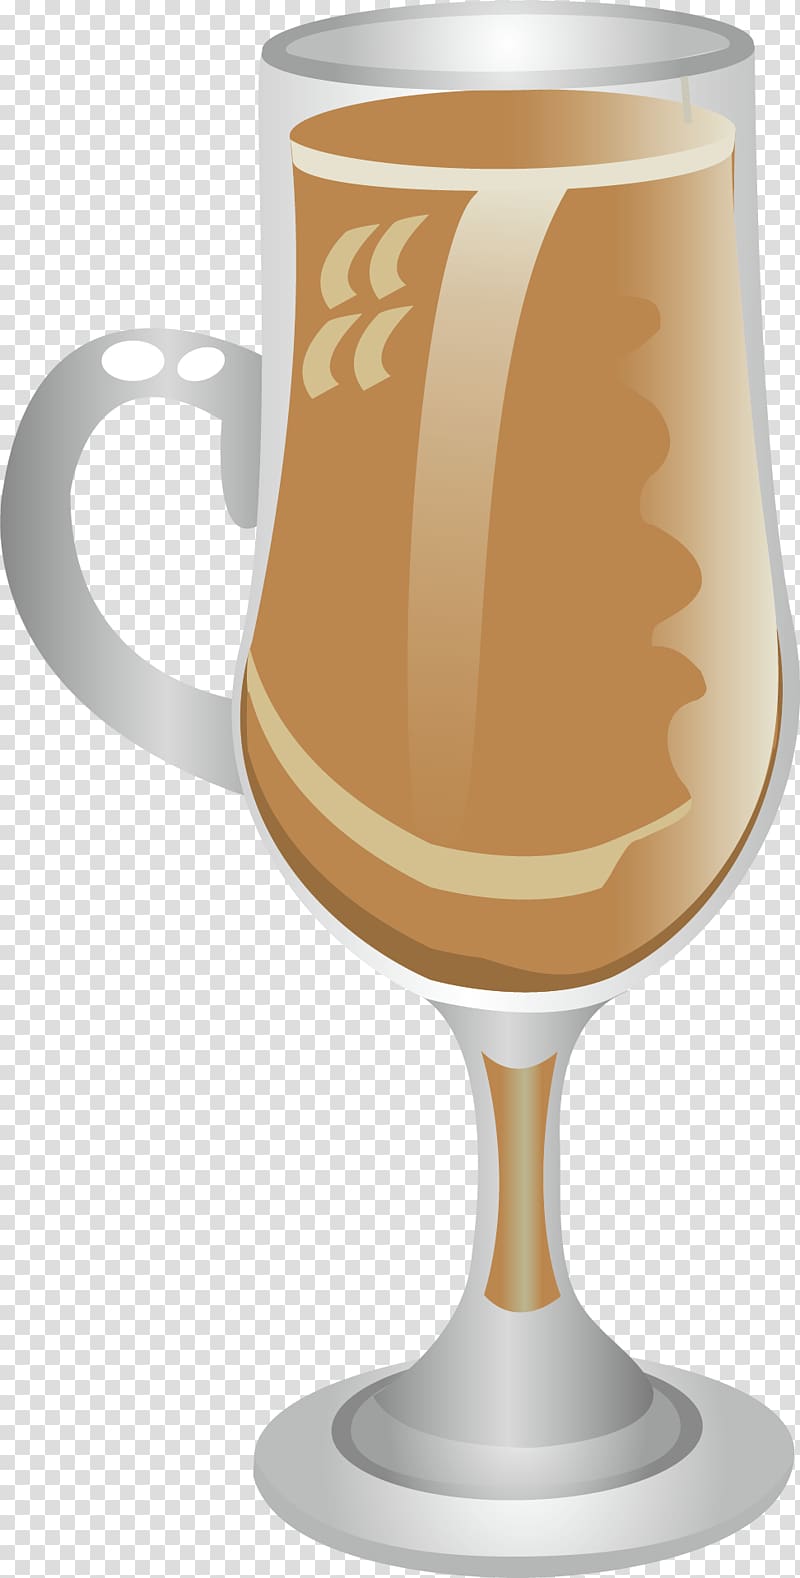 Tea Iced coffee Milk Wine glass, Cup of tea transparent background PNG clipart